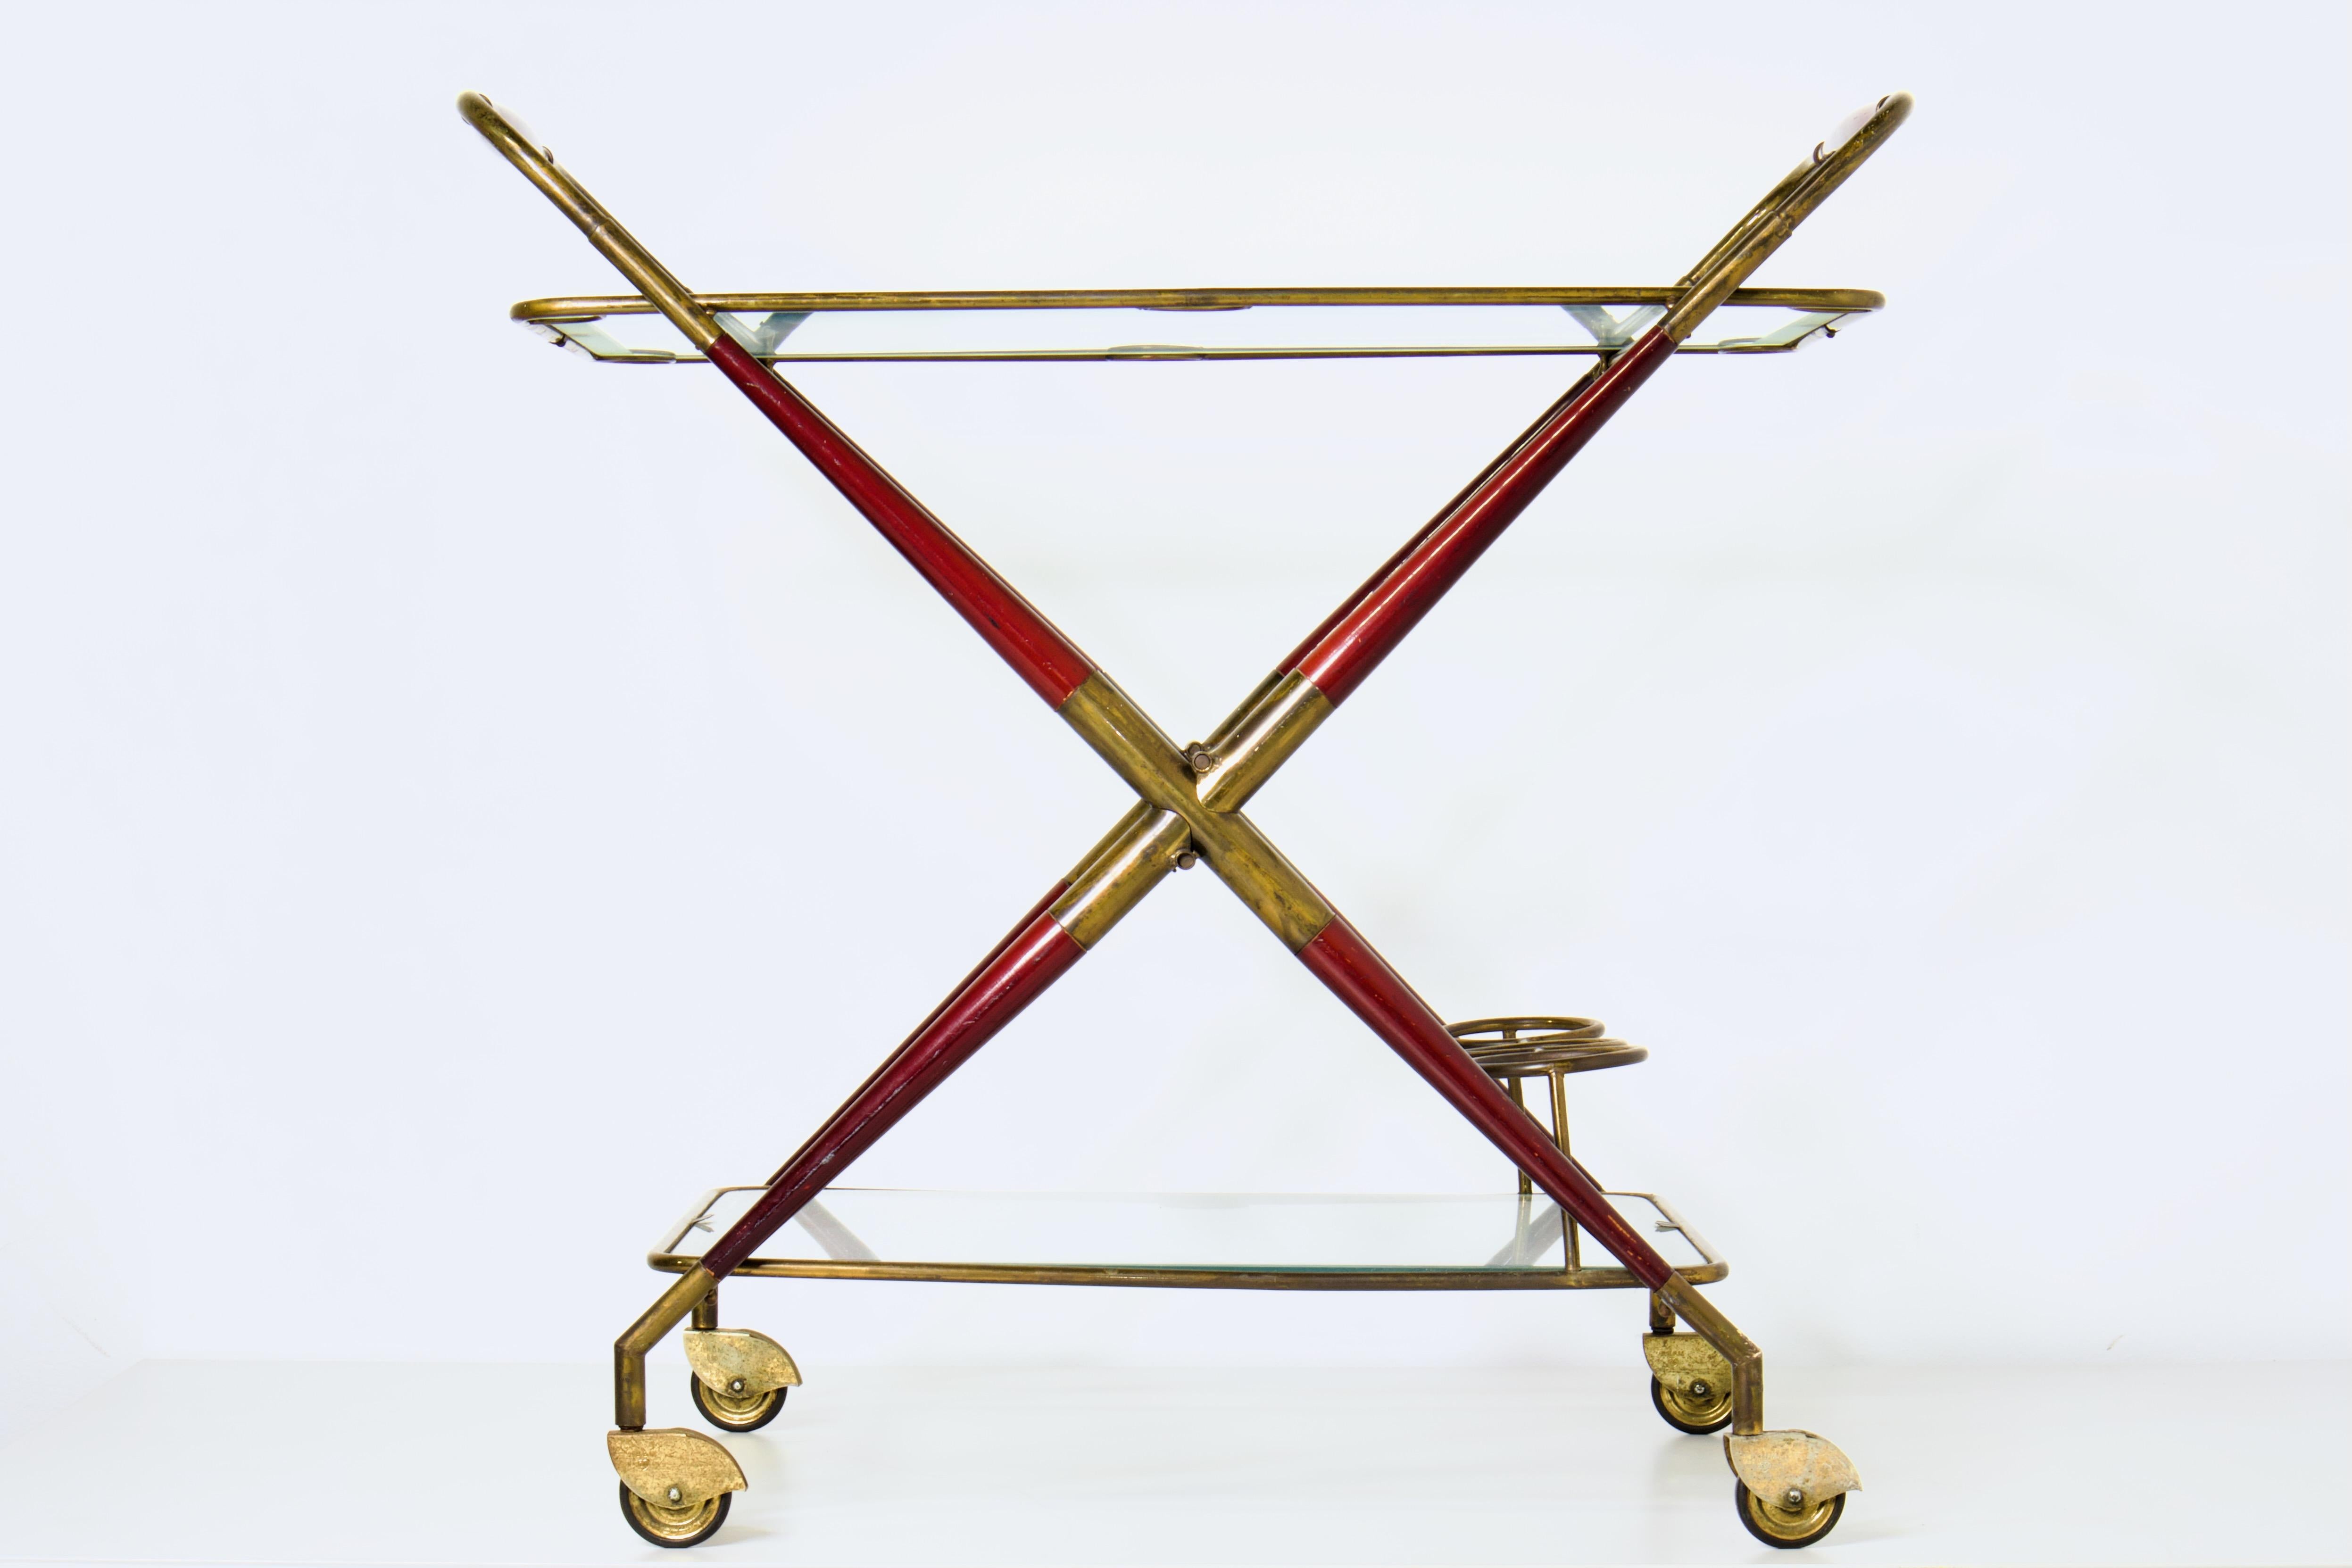 Exquisite Mid Century Modern Italian folding, rolling bar cart by Cesare Lacca. Made in the 1950s Italy, it evokes the same influences as other icons of the era: Gio Ponti, Ico Parisi and Gigi Radice.

This extraordinarily preserved set includes the